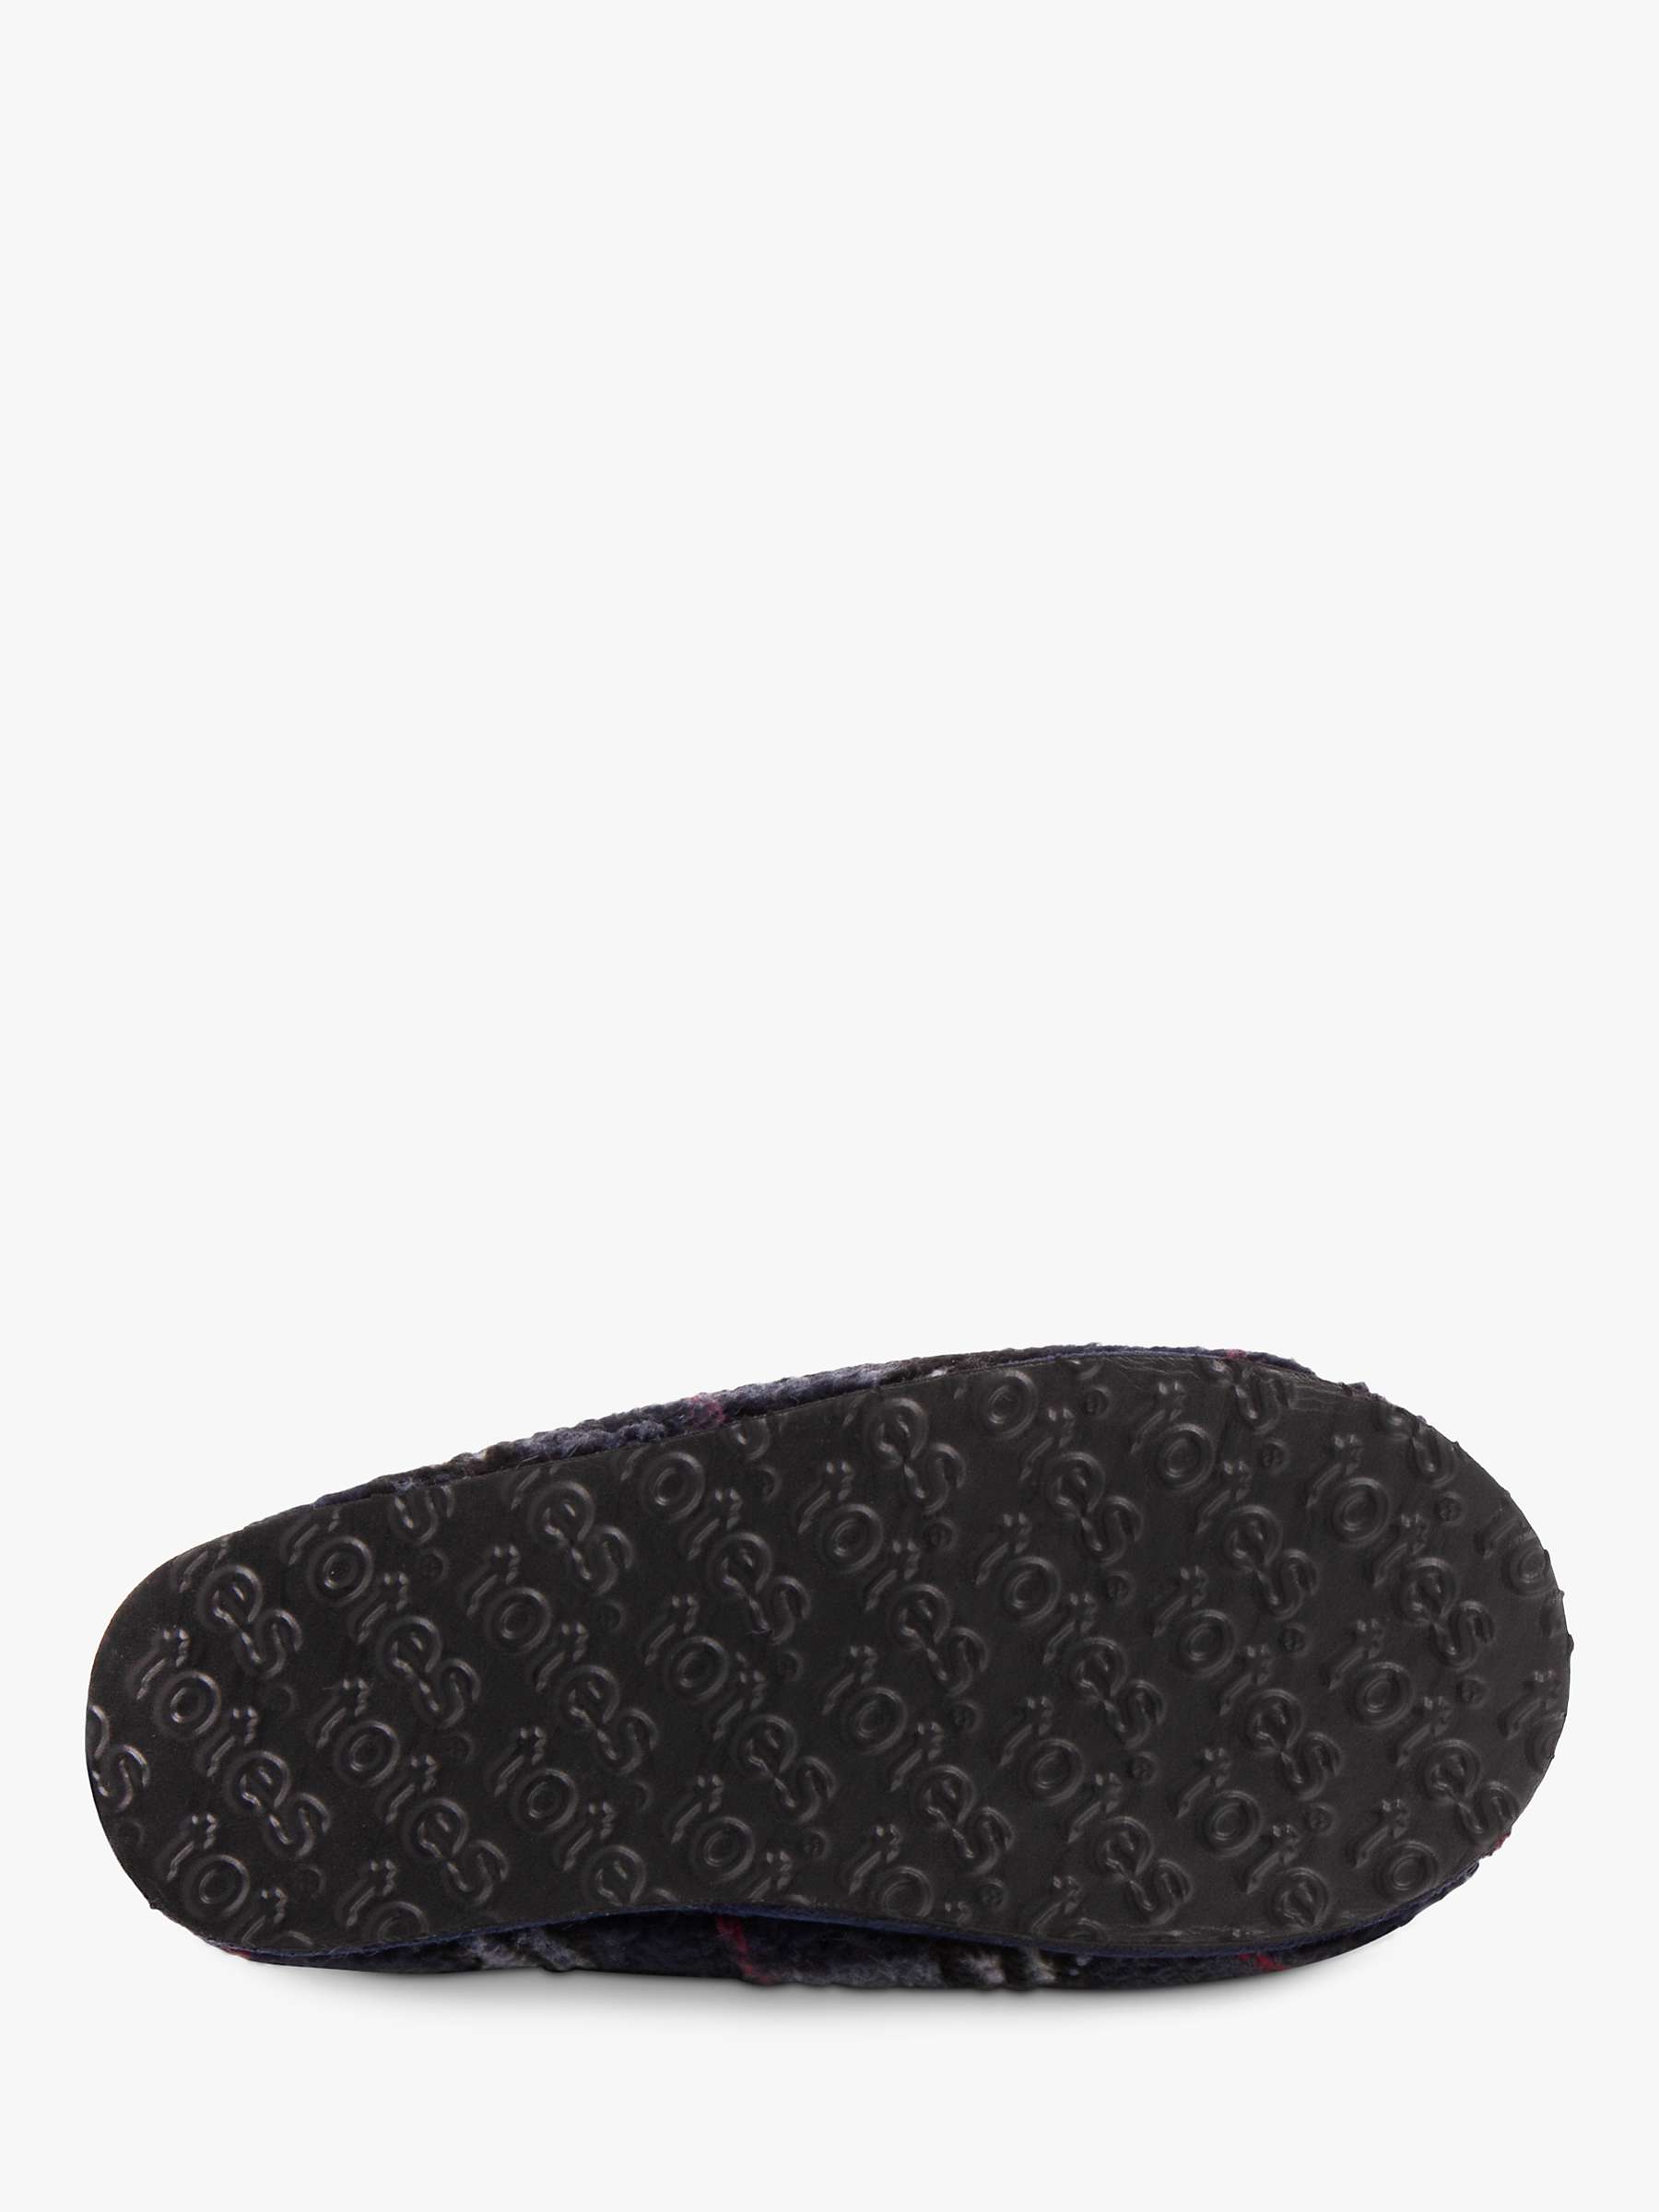 Buy totes Borg Check Mule Slippers Online at johnlewis.com